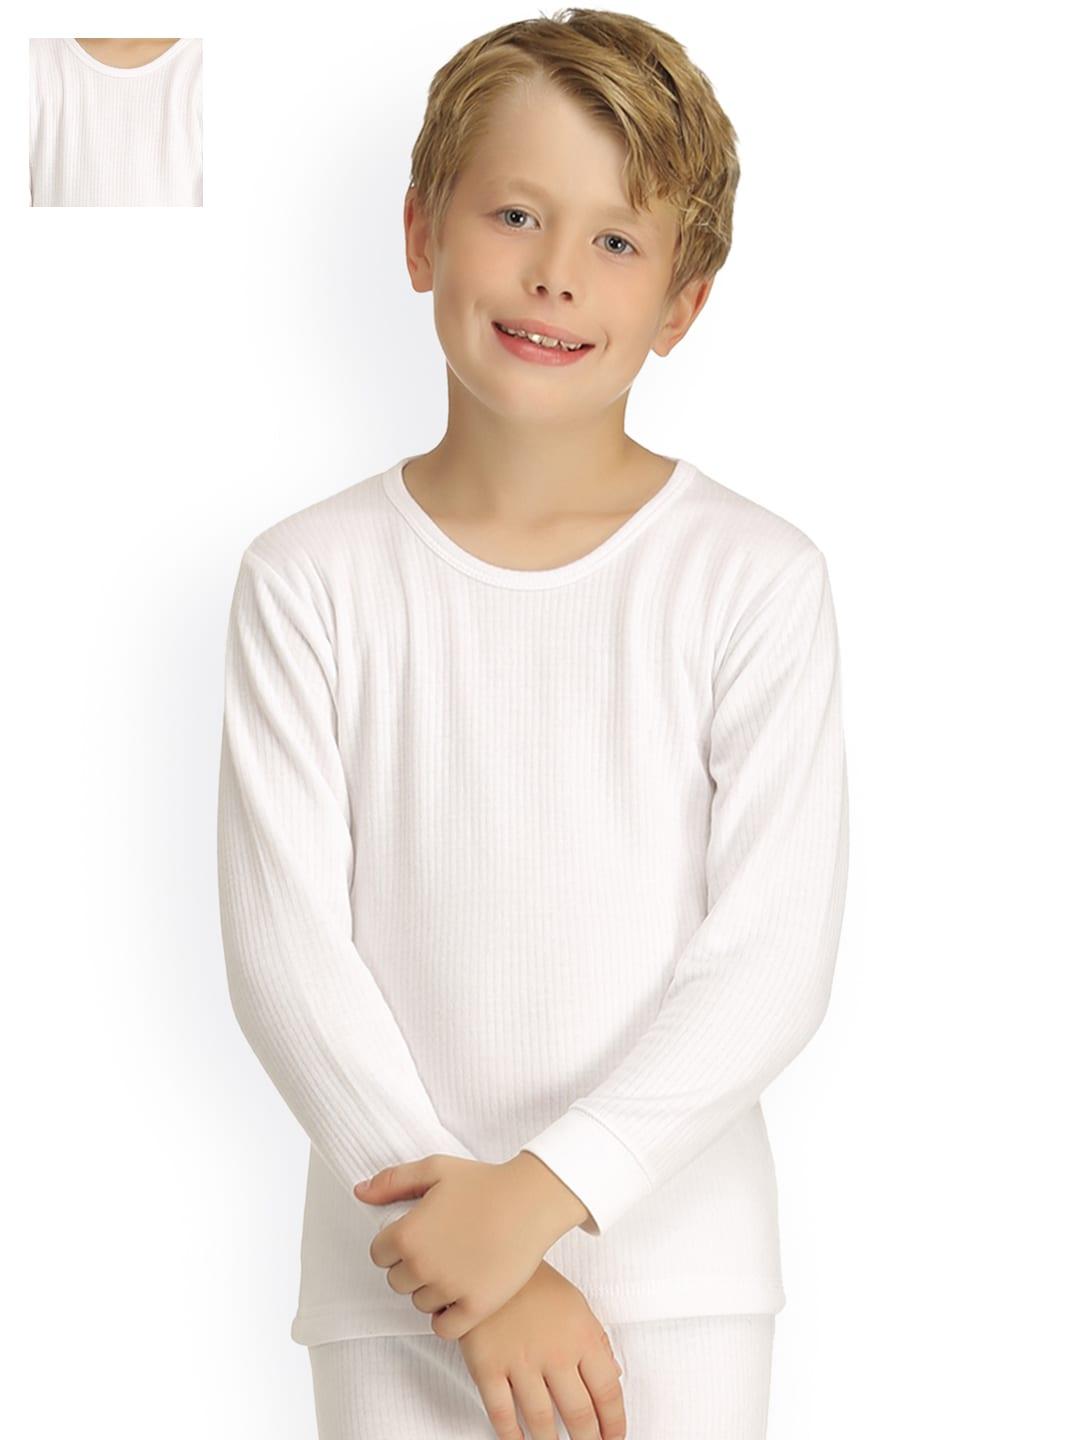 kanvin-pack-of-2-white-thermal-t-shirts-2340w2340